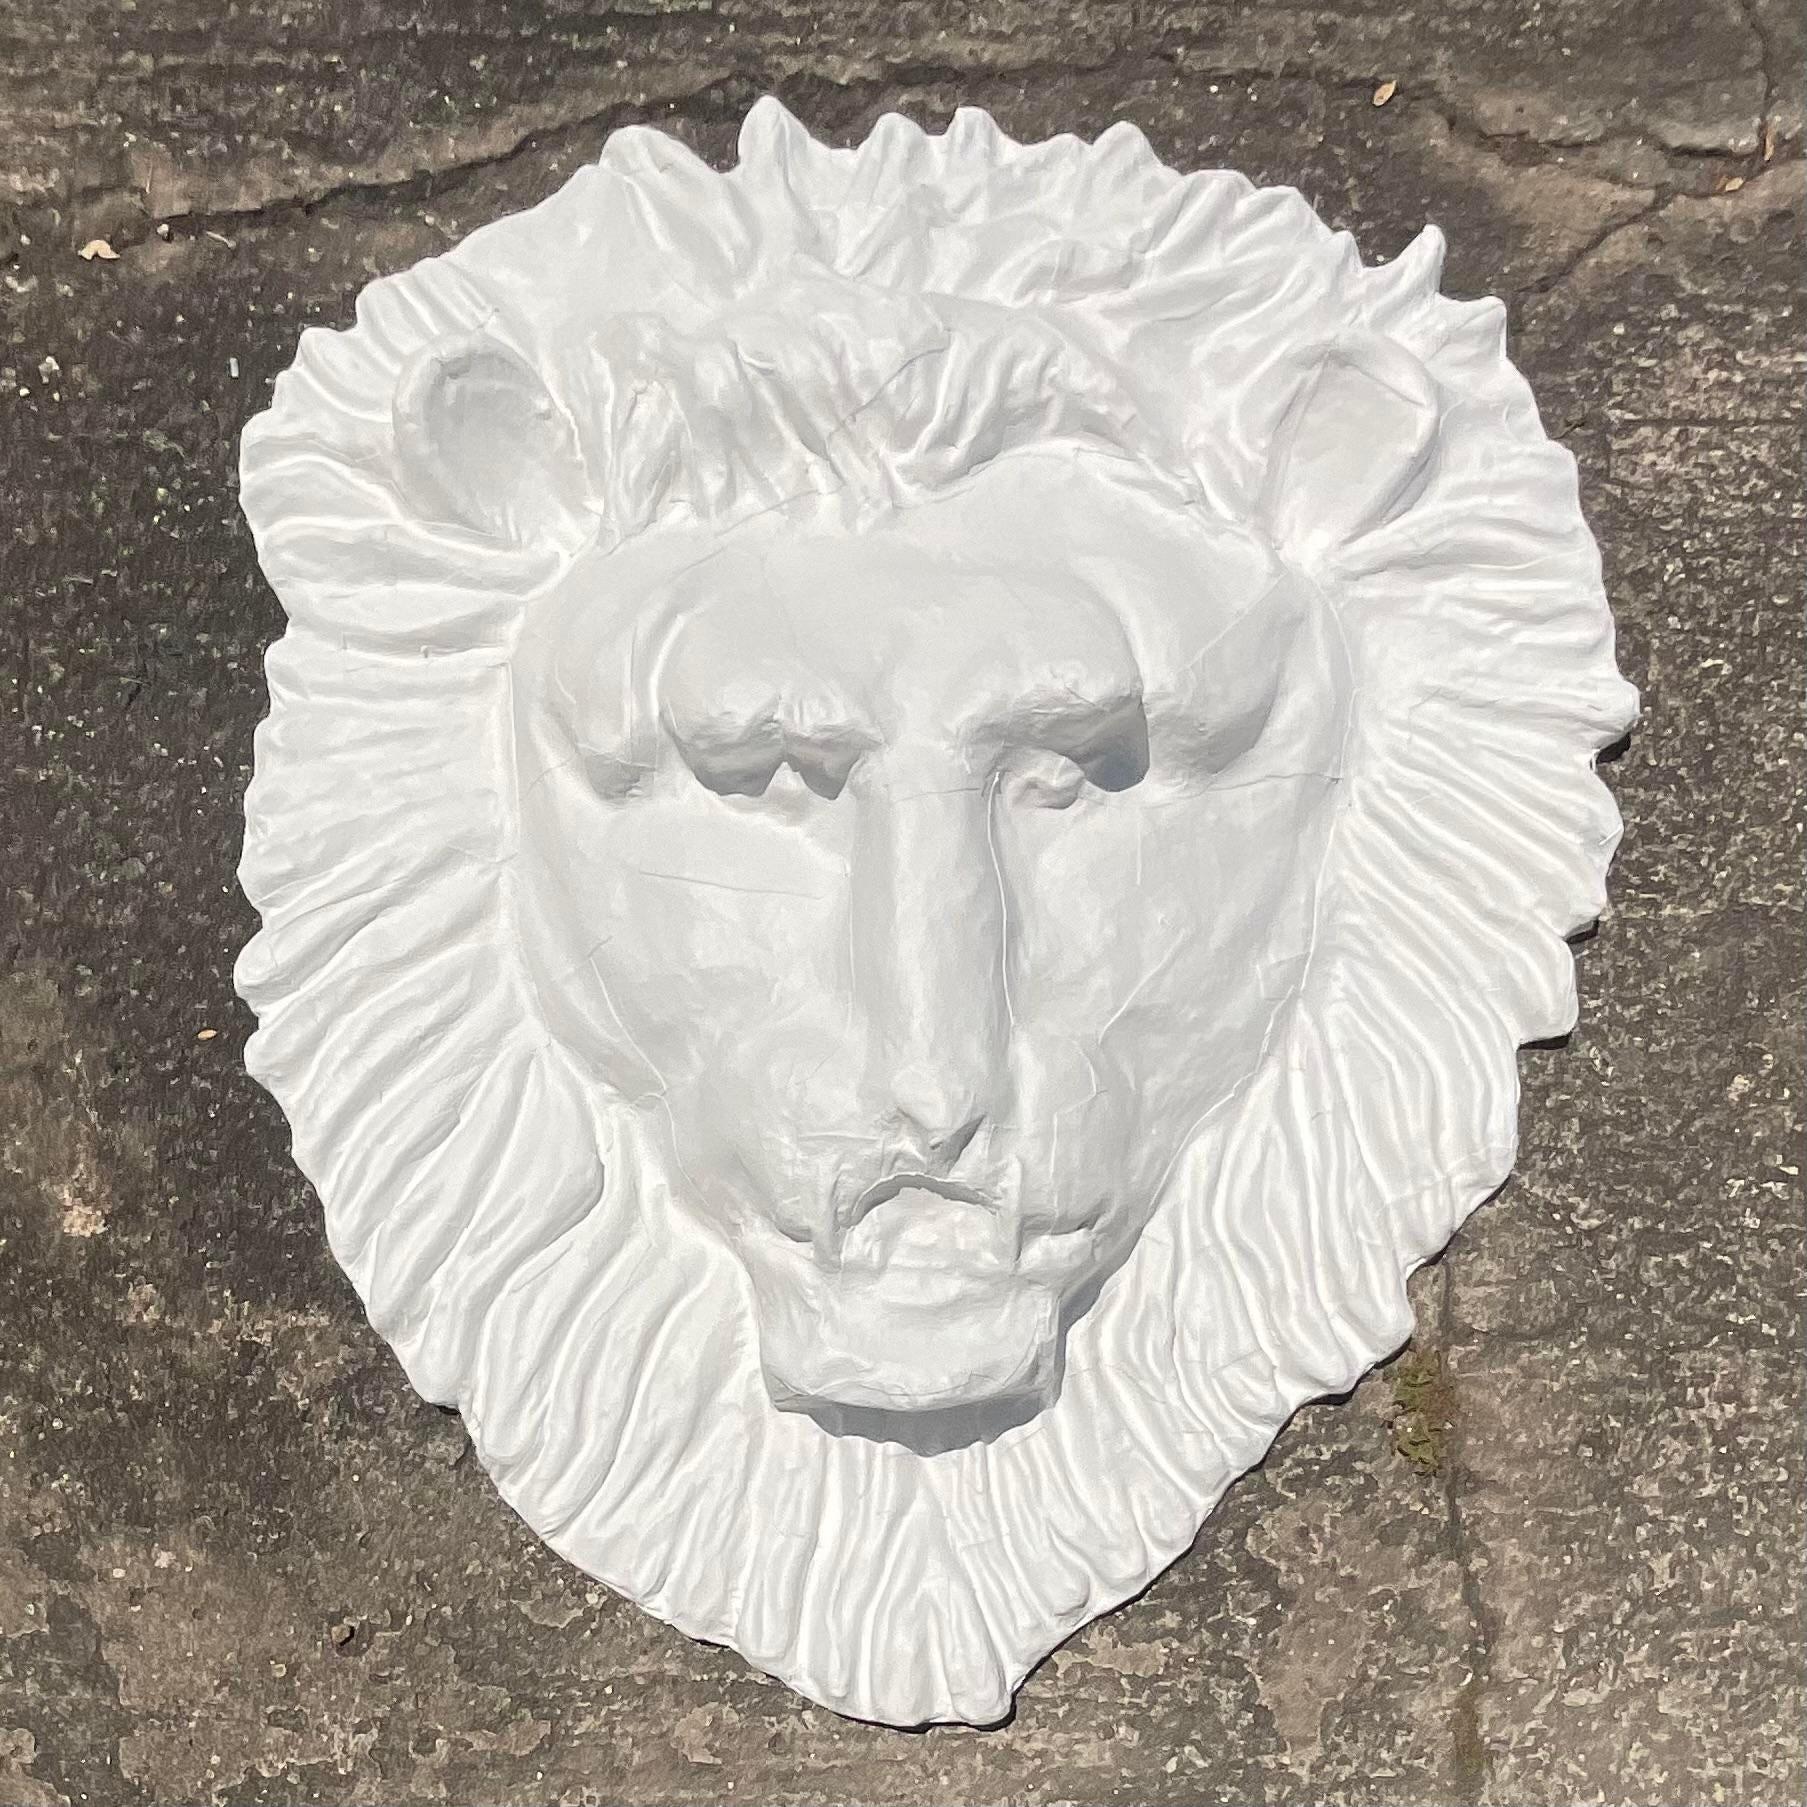 Add a regal touch to your space with our Vintage Boho Monumental Painted Leather Lion's Head. This stunning piece combines American craftsmanship with boho artistry, creating a majestic focal point that captures both boldness and bohemian allure.